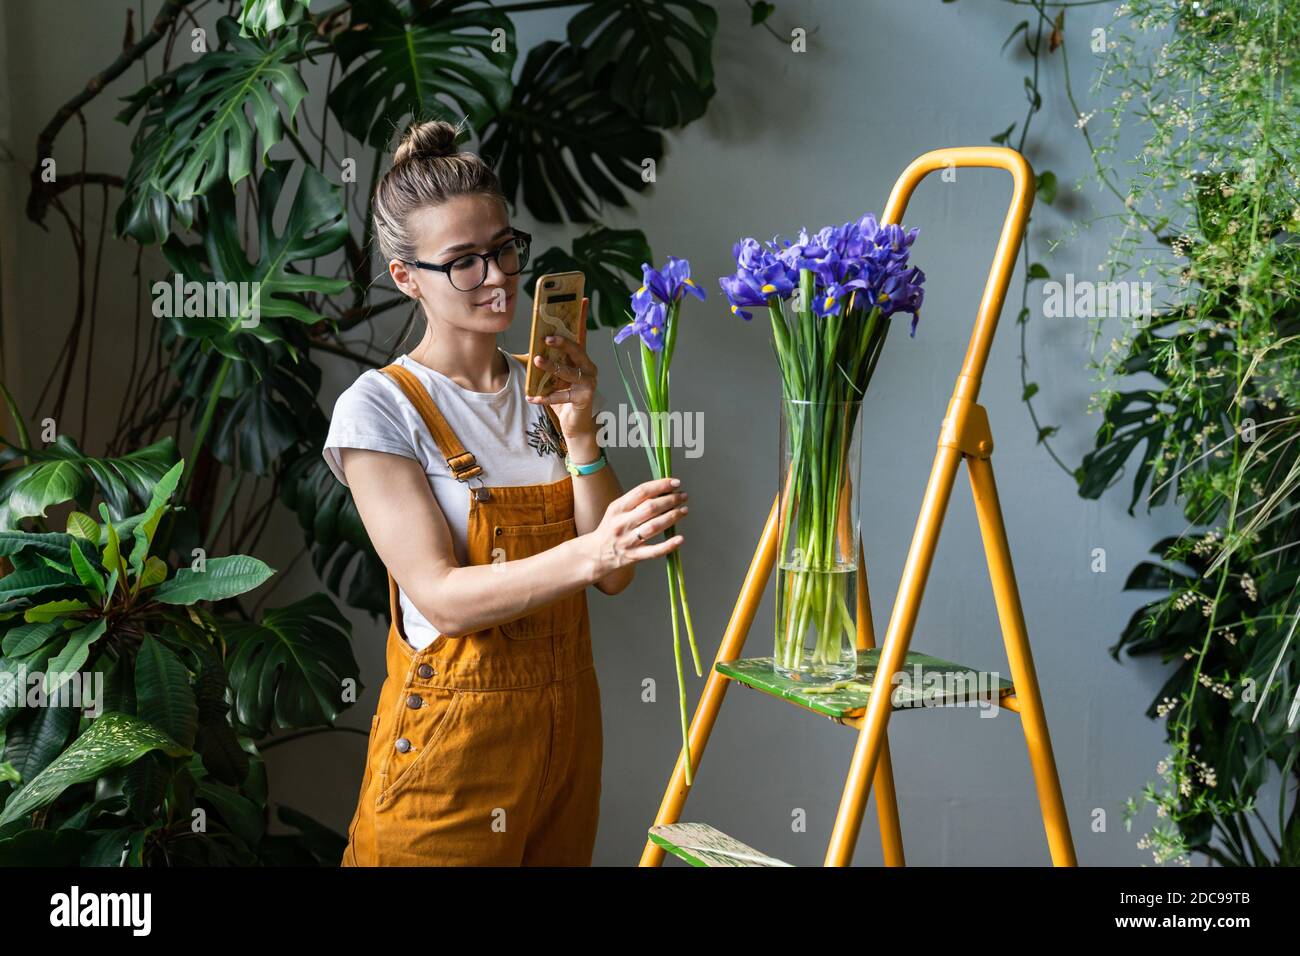 Smiling woman florist in orange overalls takes a photo of bouquet of purple irises in glass vase on smartphone, standing on stepladder. Love for flowe Stock Photo